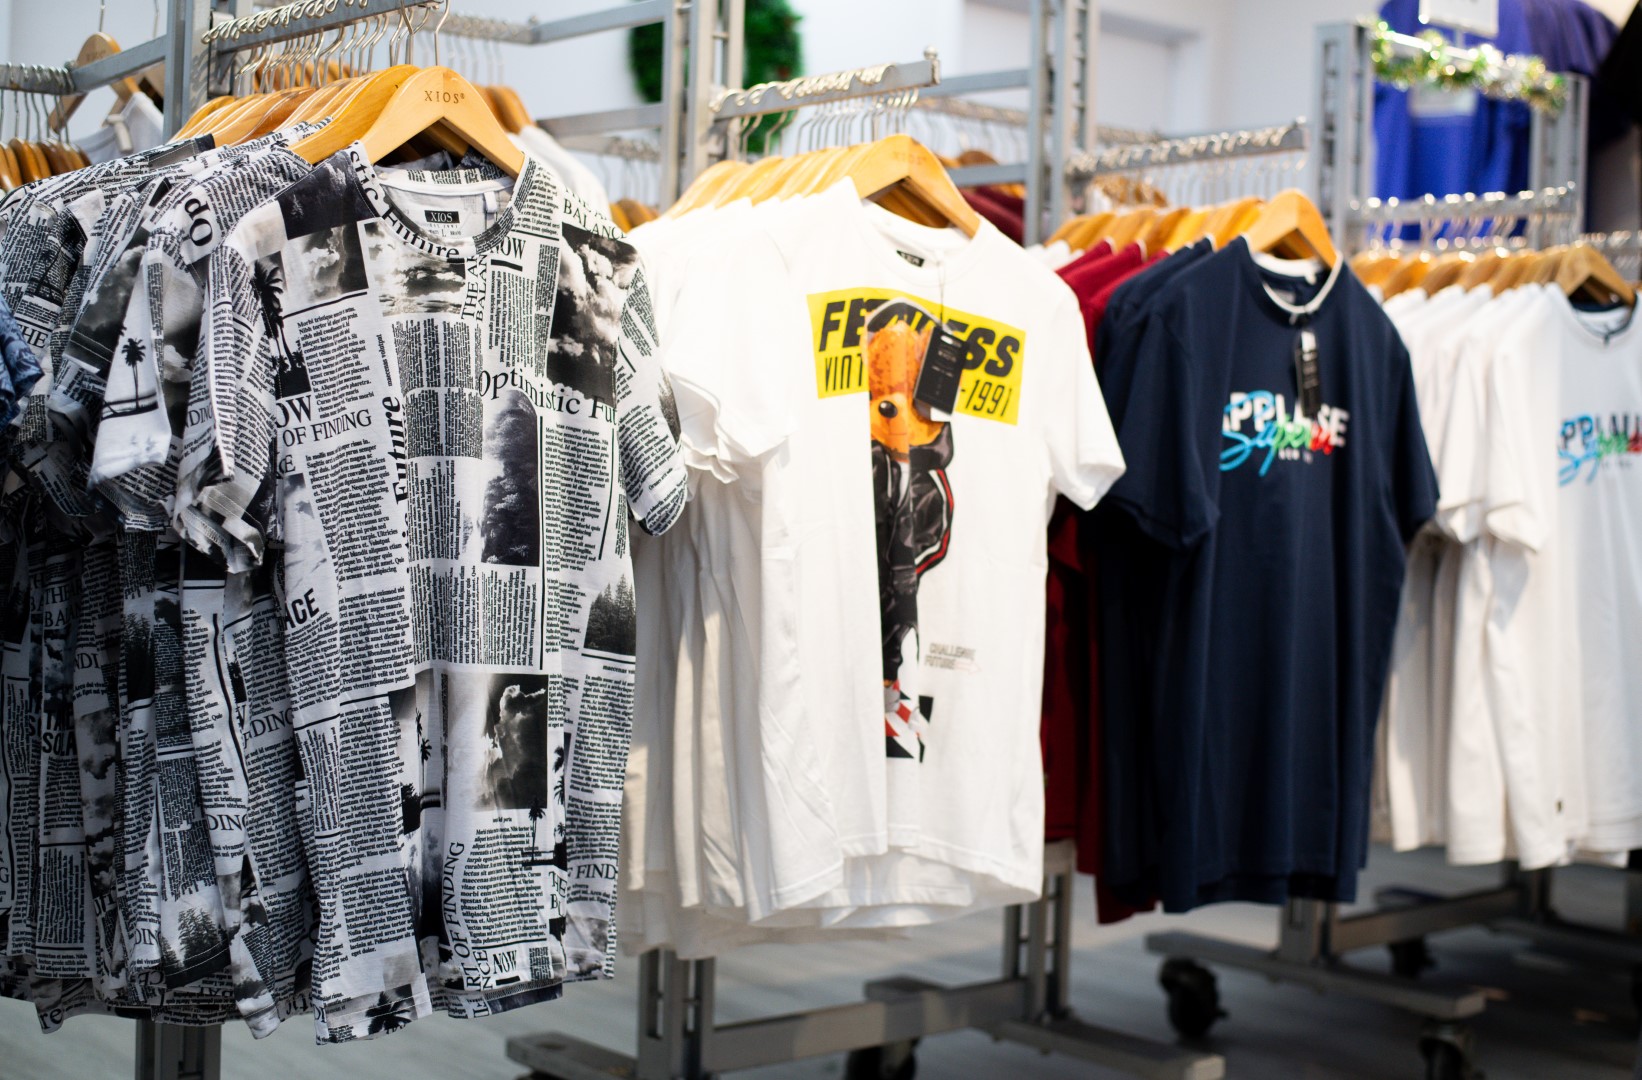 Colorful t-shirts with various prints hanging on display racks in a clothing store, including one with a newspaper design and another with bold graphics.